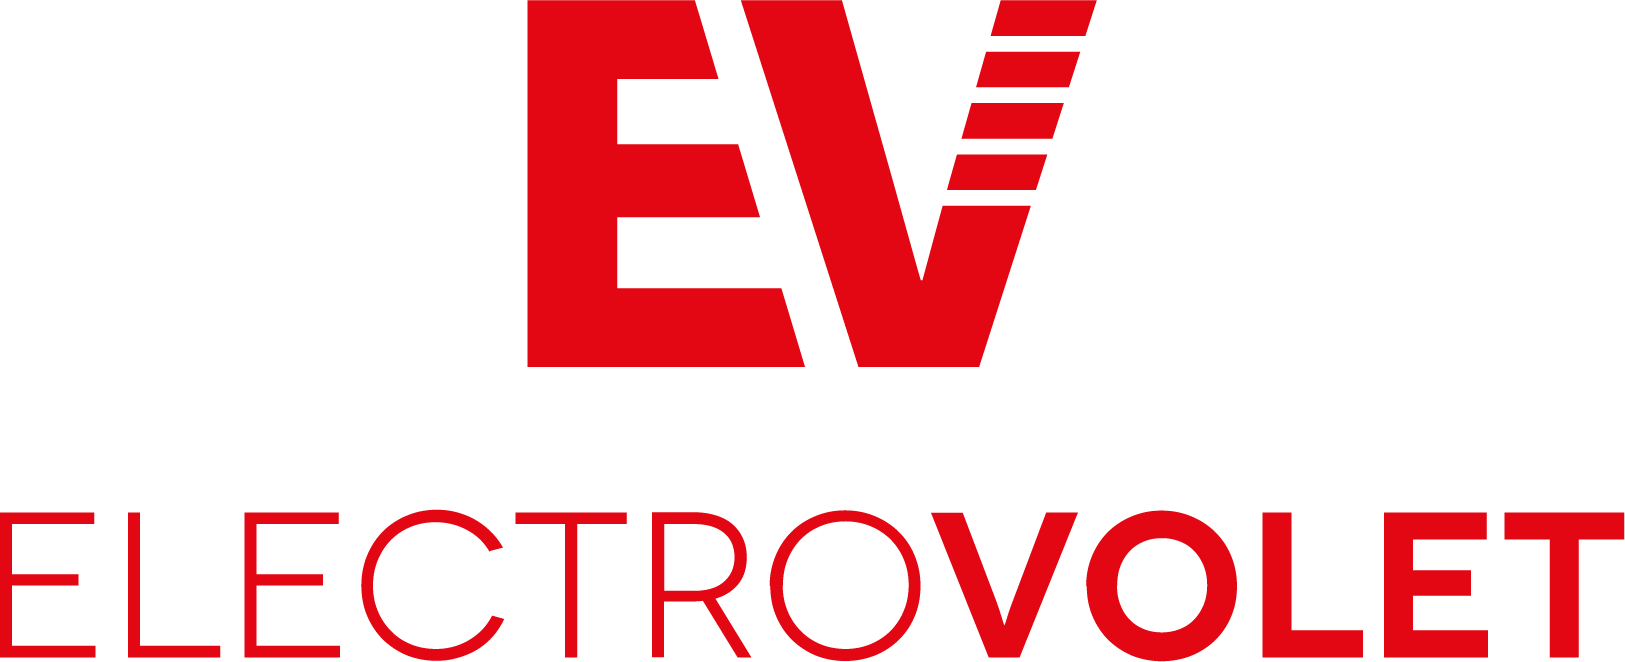 Electrovolet